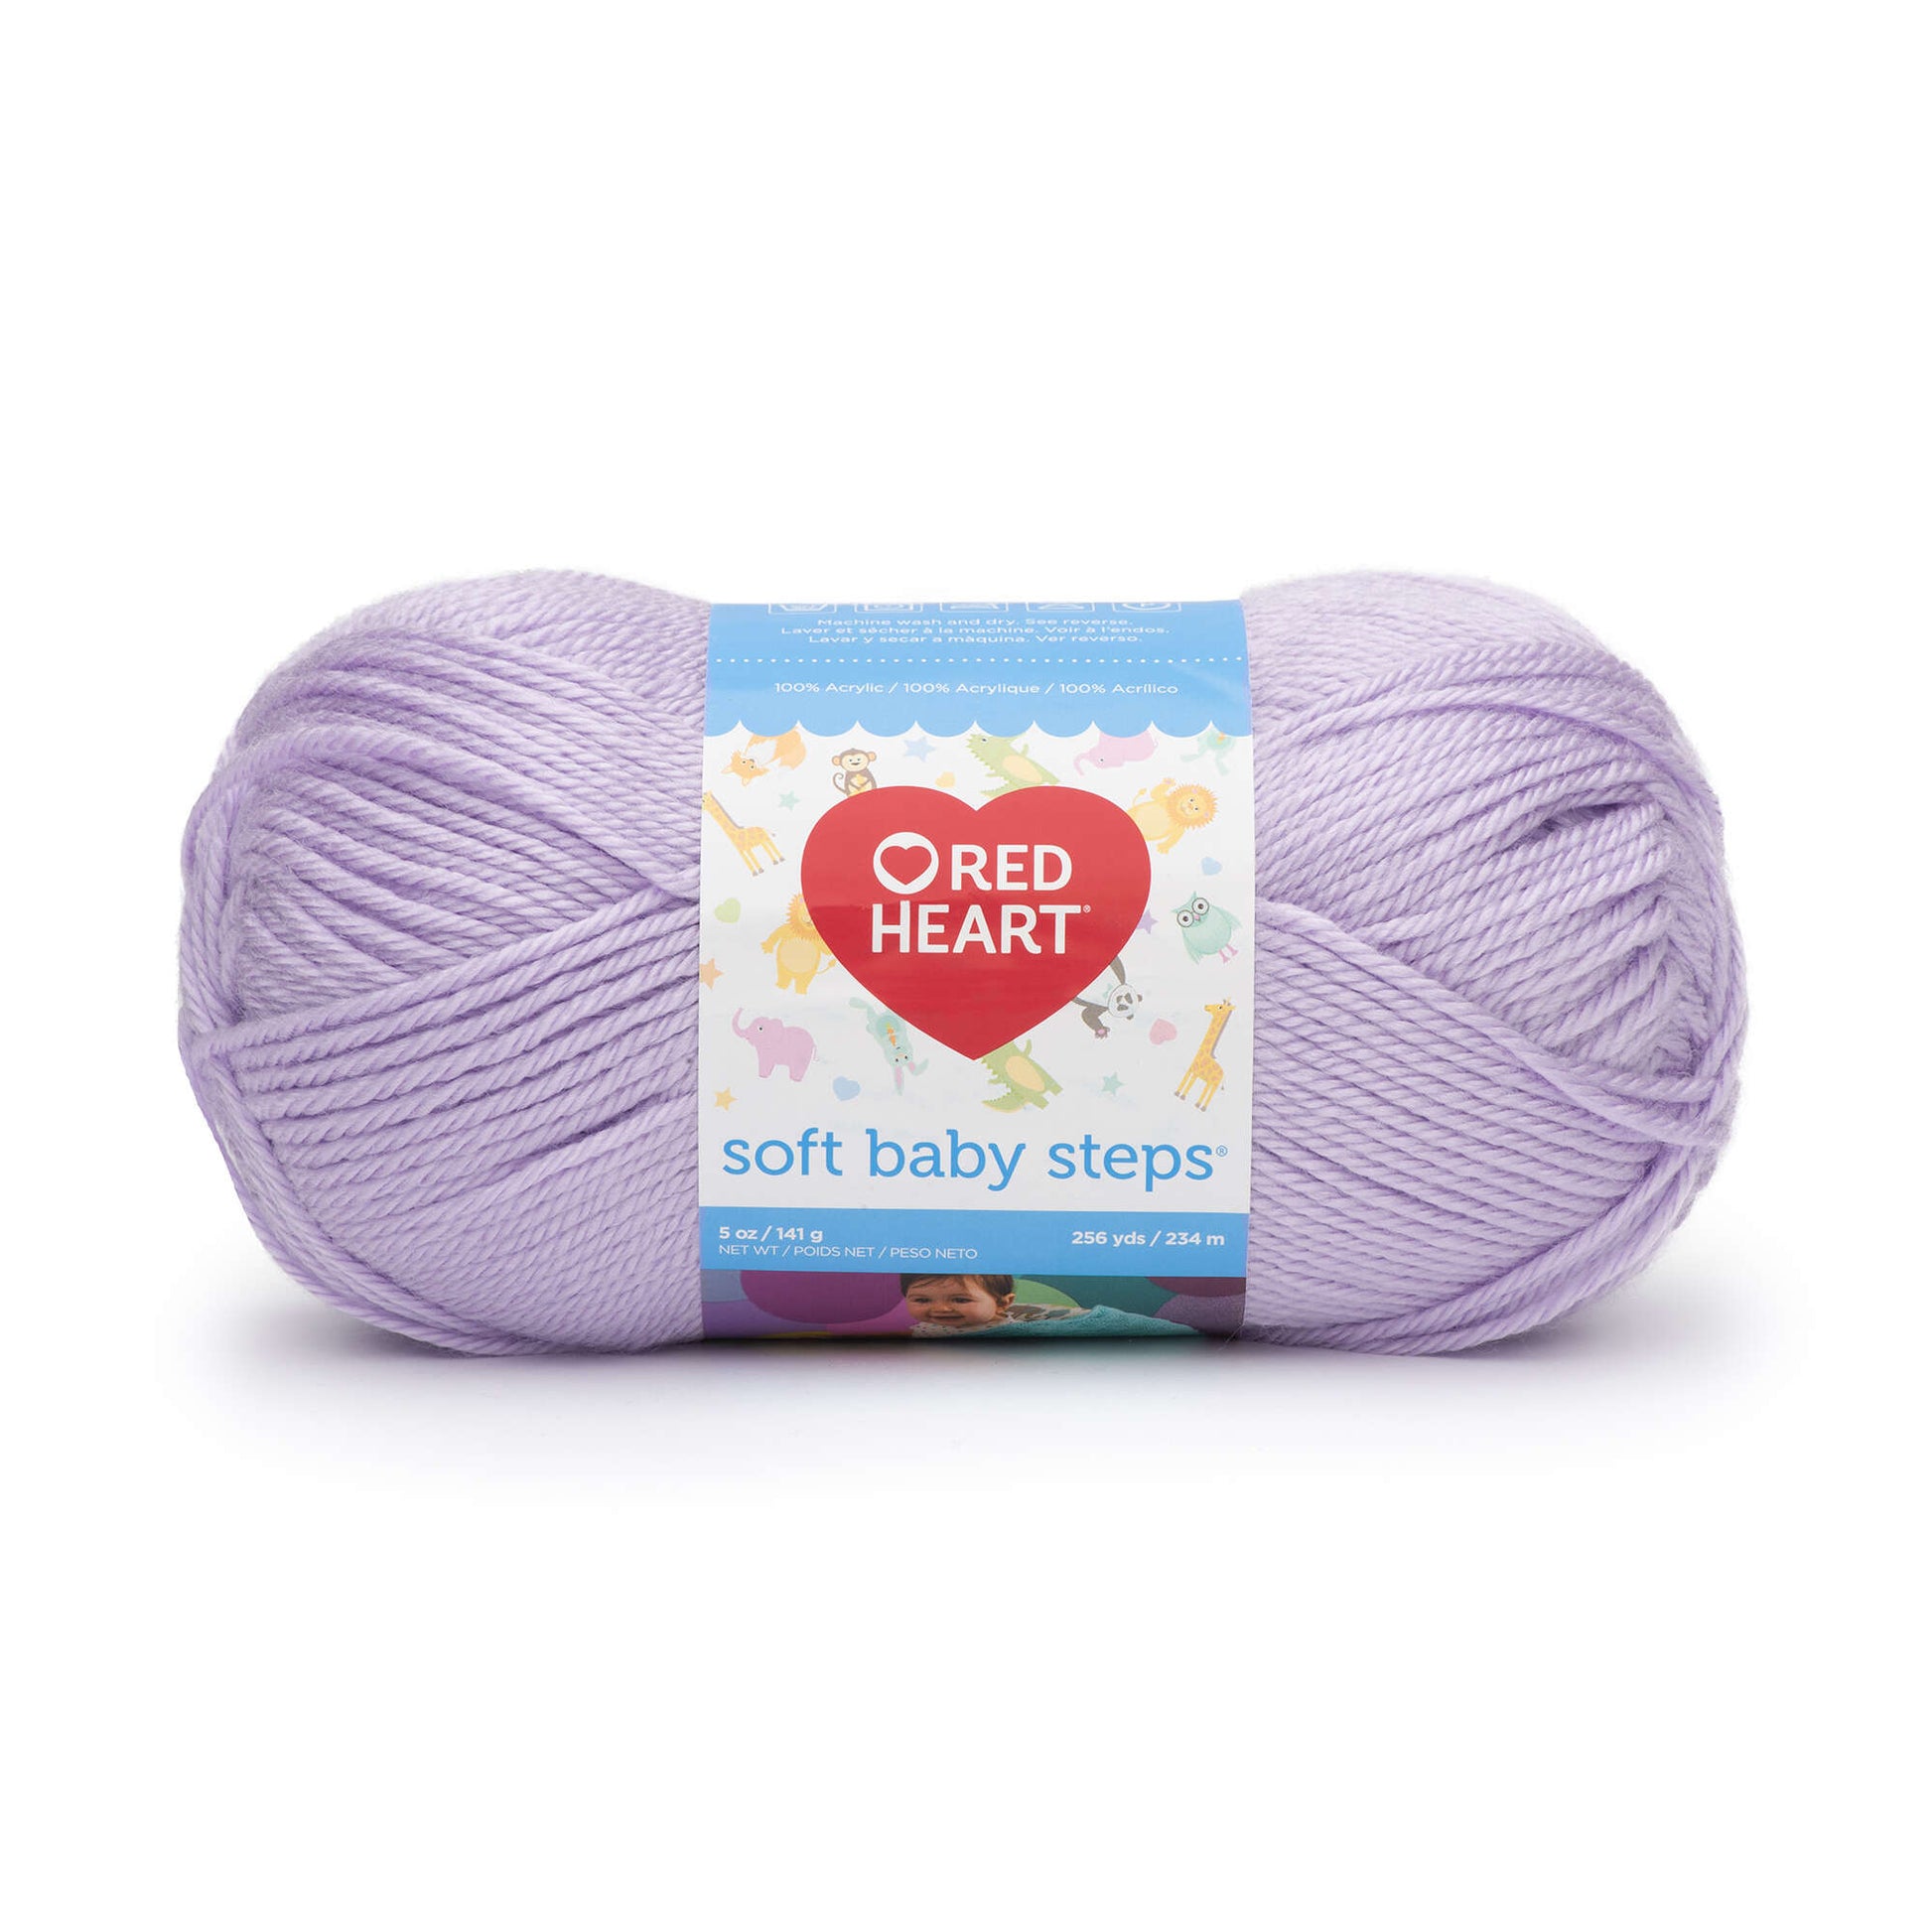 Did anyone order 2 balls of Baby Soft yarn in the color Baby White